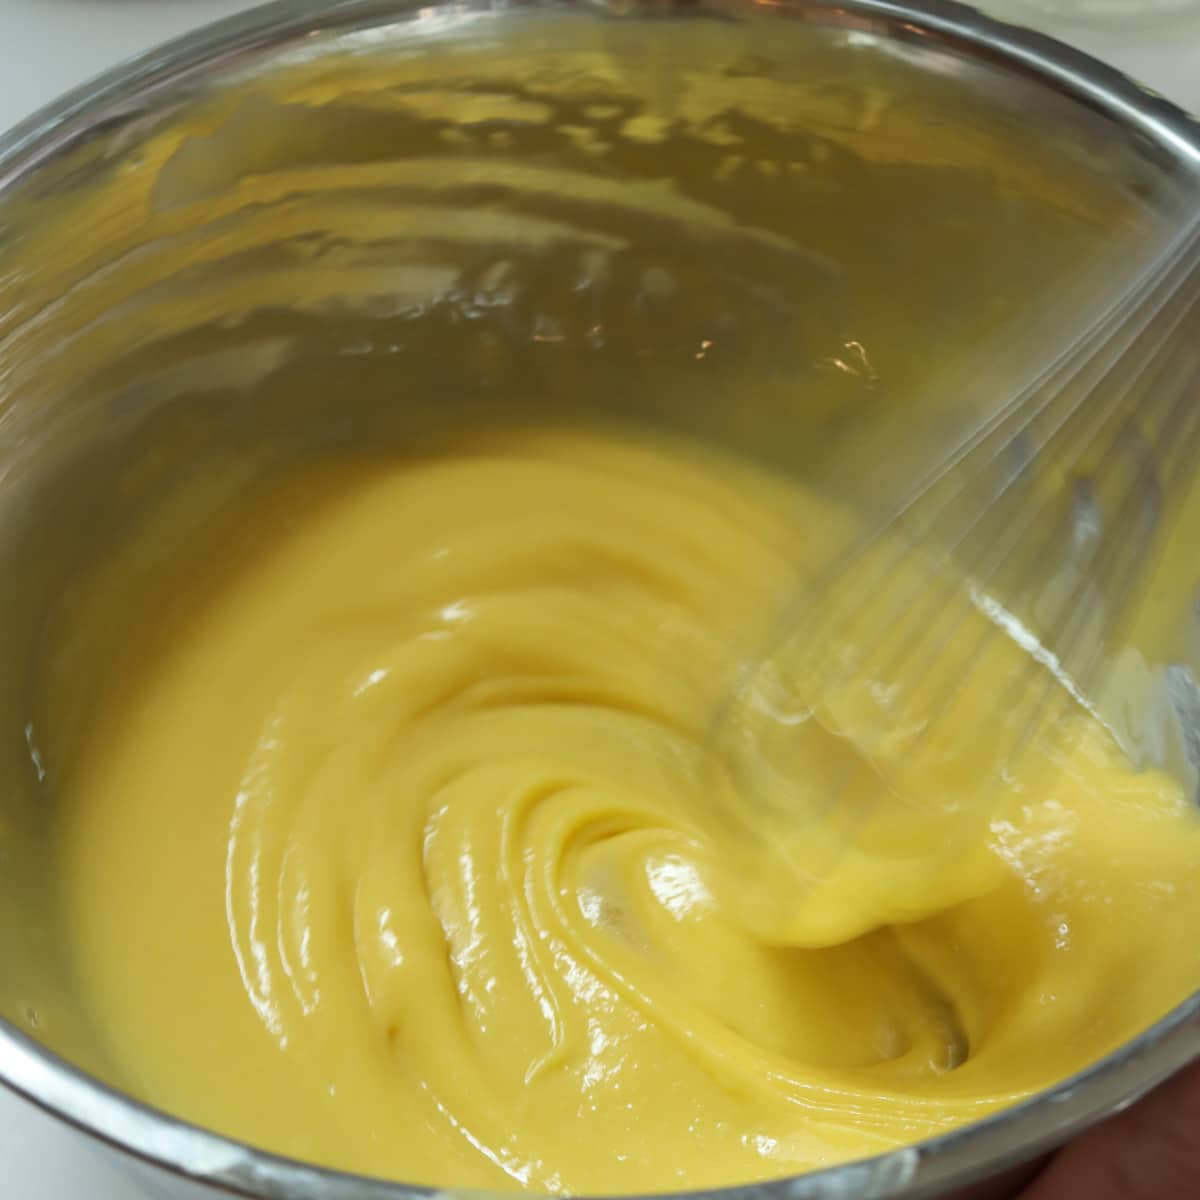 whisk the oil into the yolks until thick